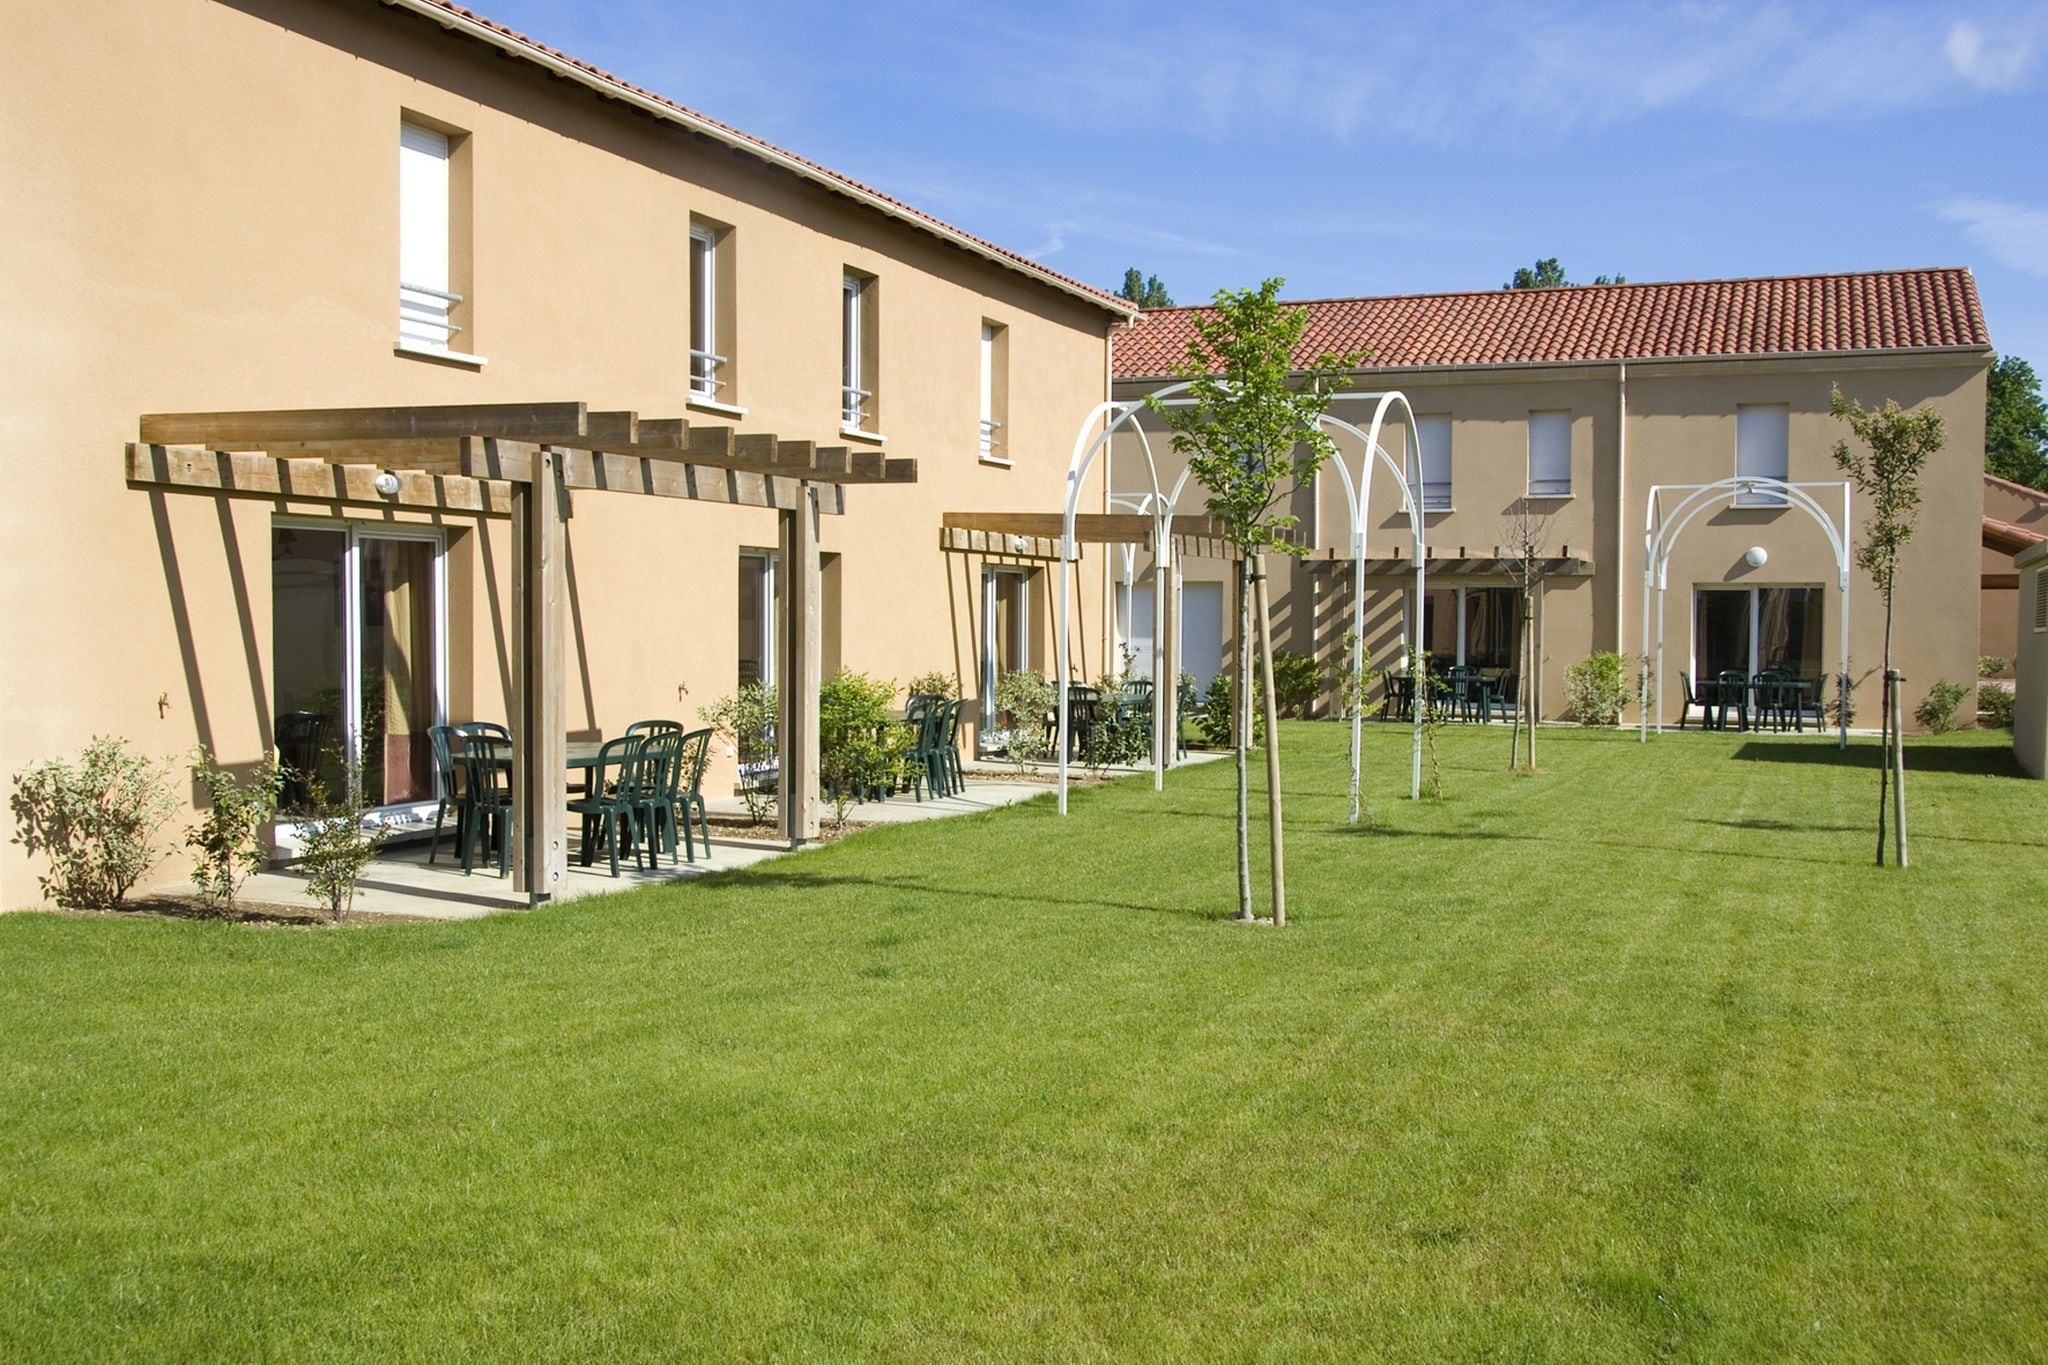 Beautiful apartment in a picturesque city in the Dordogne